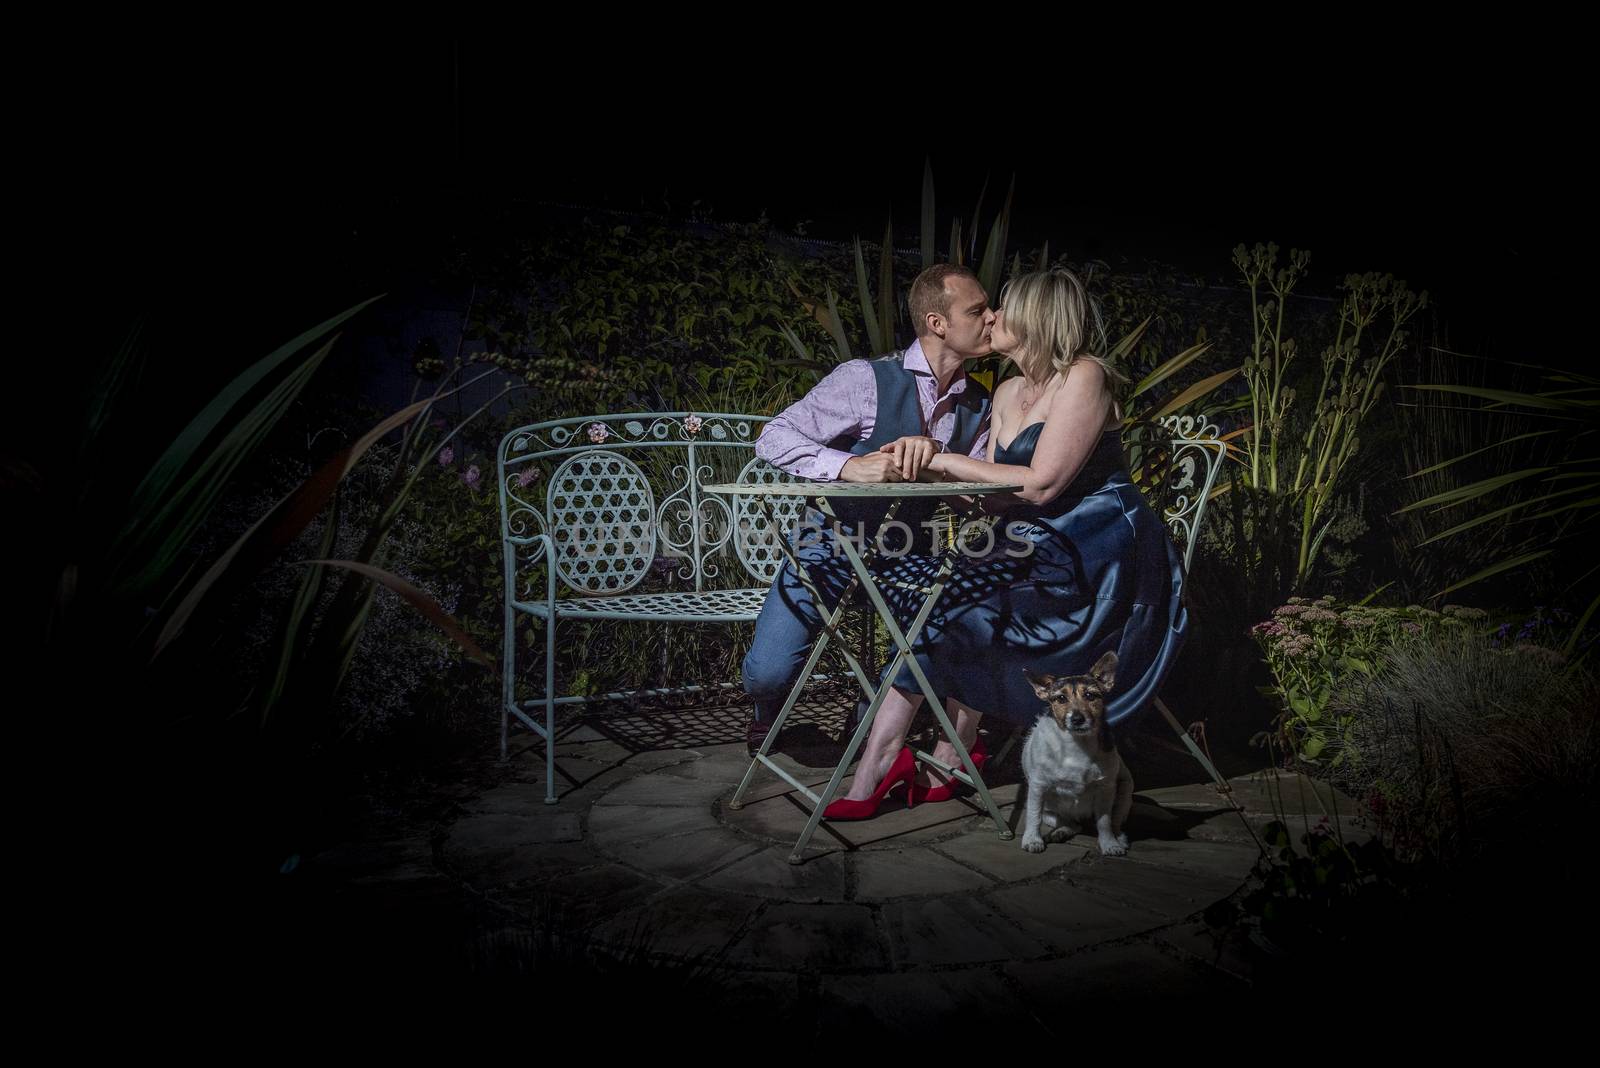 Quorn, UK - Aug 2019: Couple kissing on a garden bench at night, dog in forground